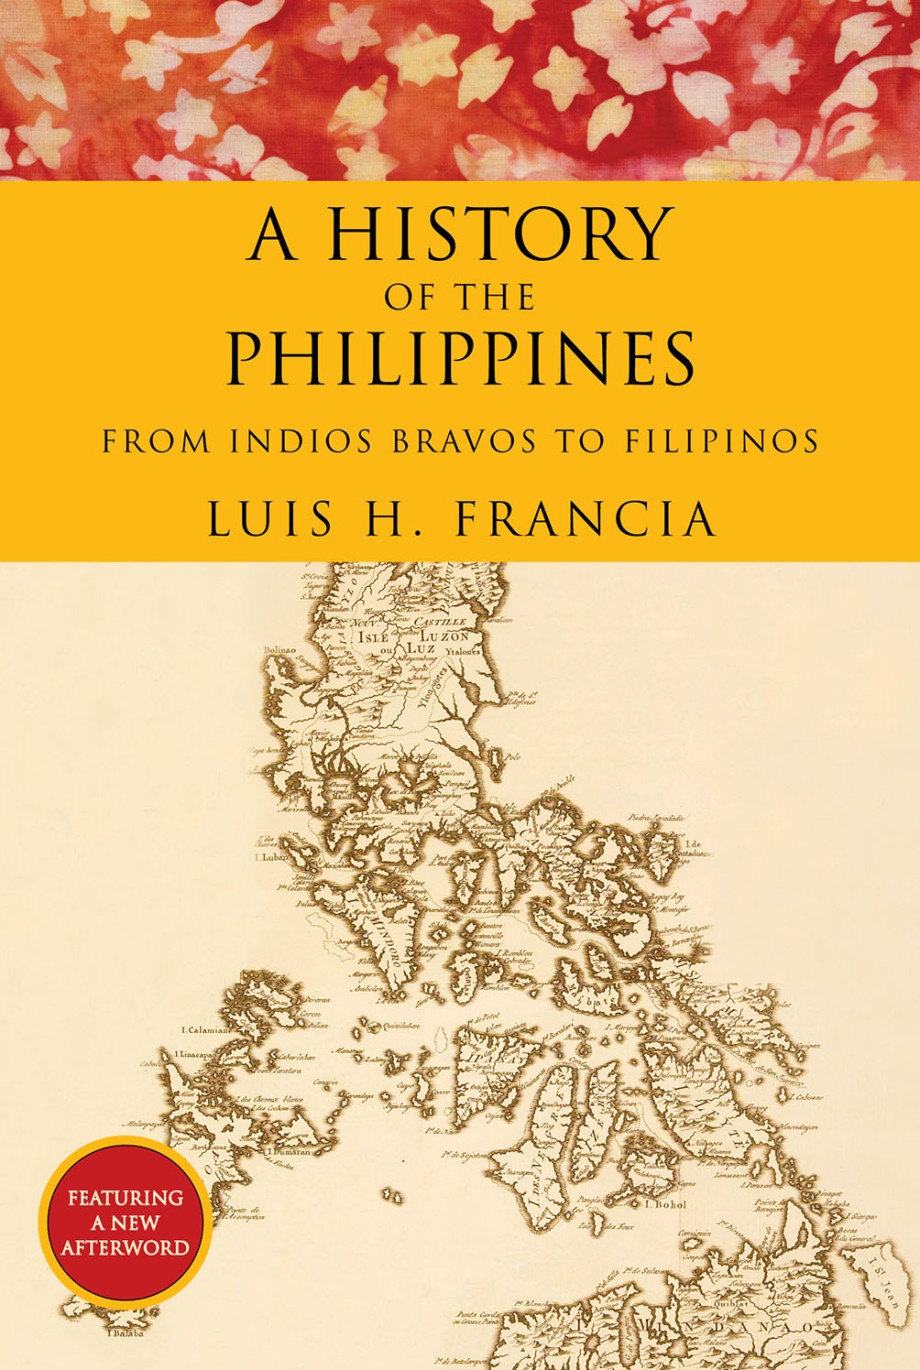 History of the Philippines From Indios Bravos to Filipinos